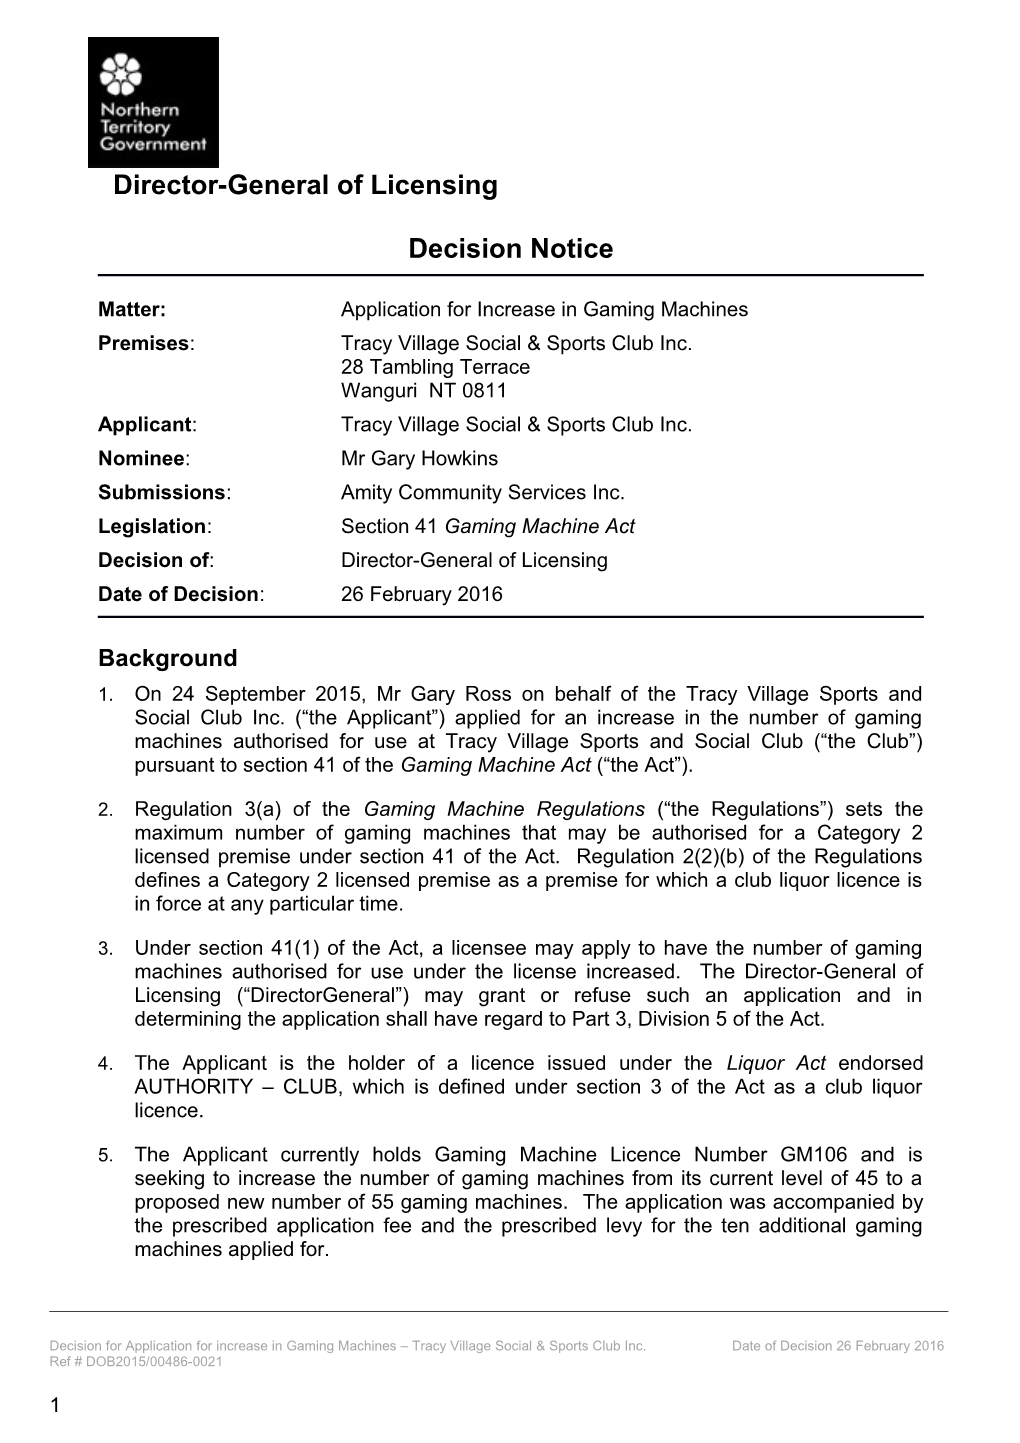 Tracy Village Social and Sports Club Inc - Application for Increase in Gaming Machines